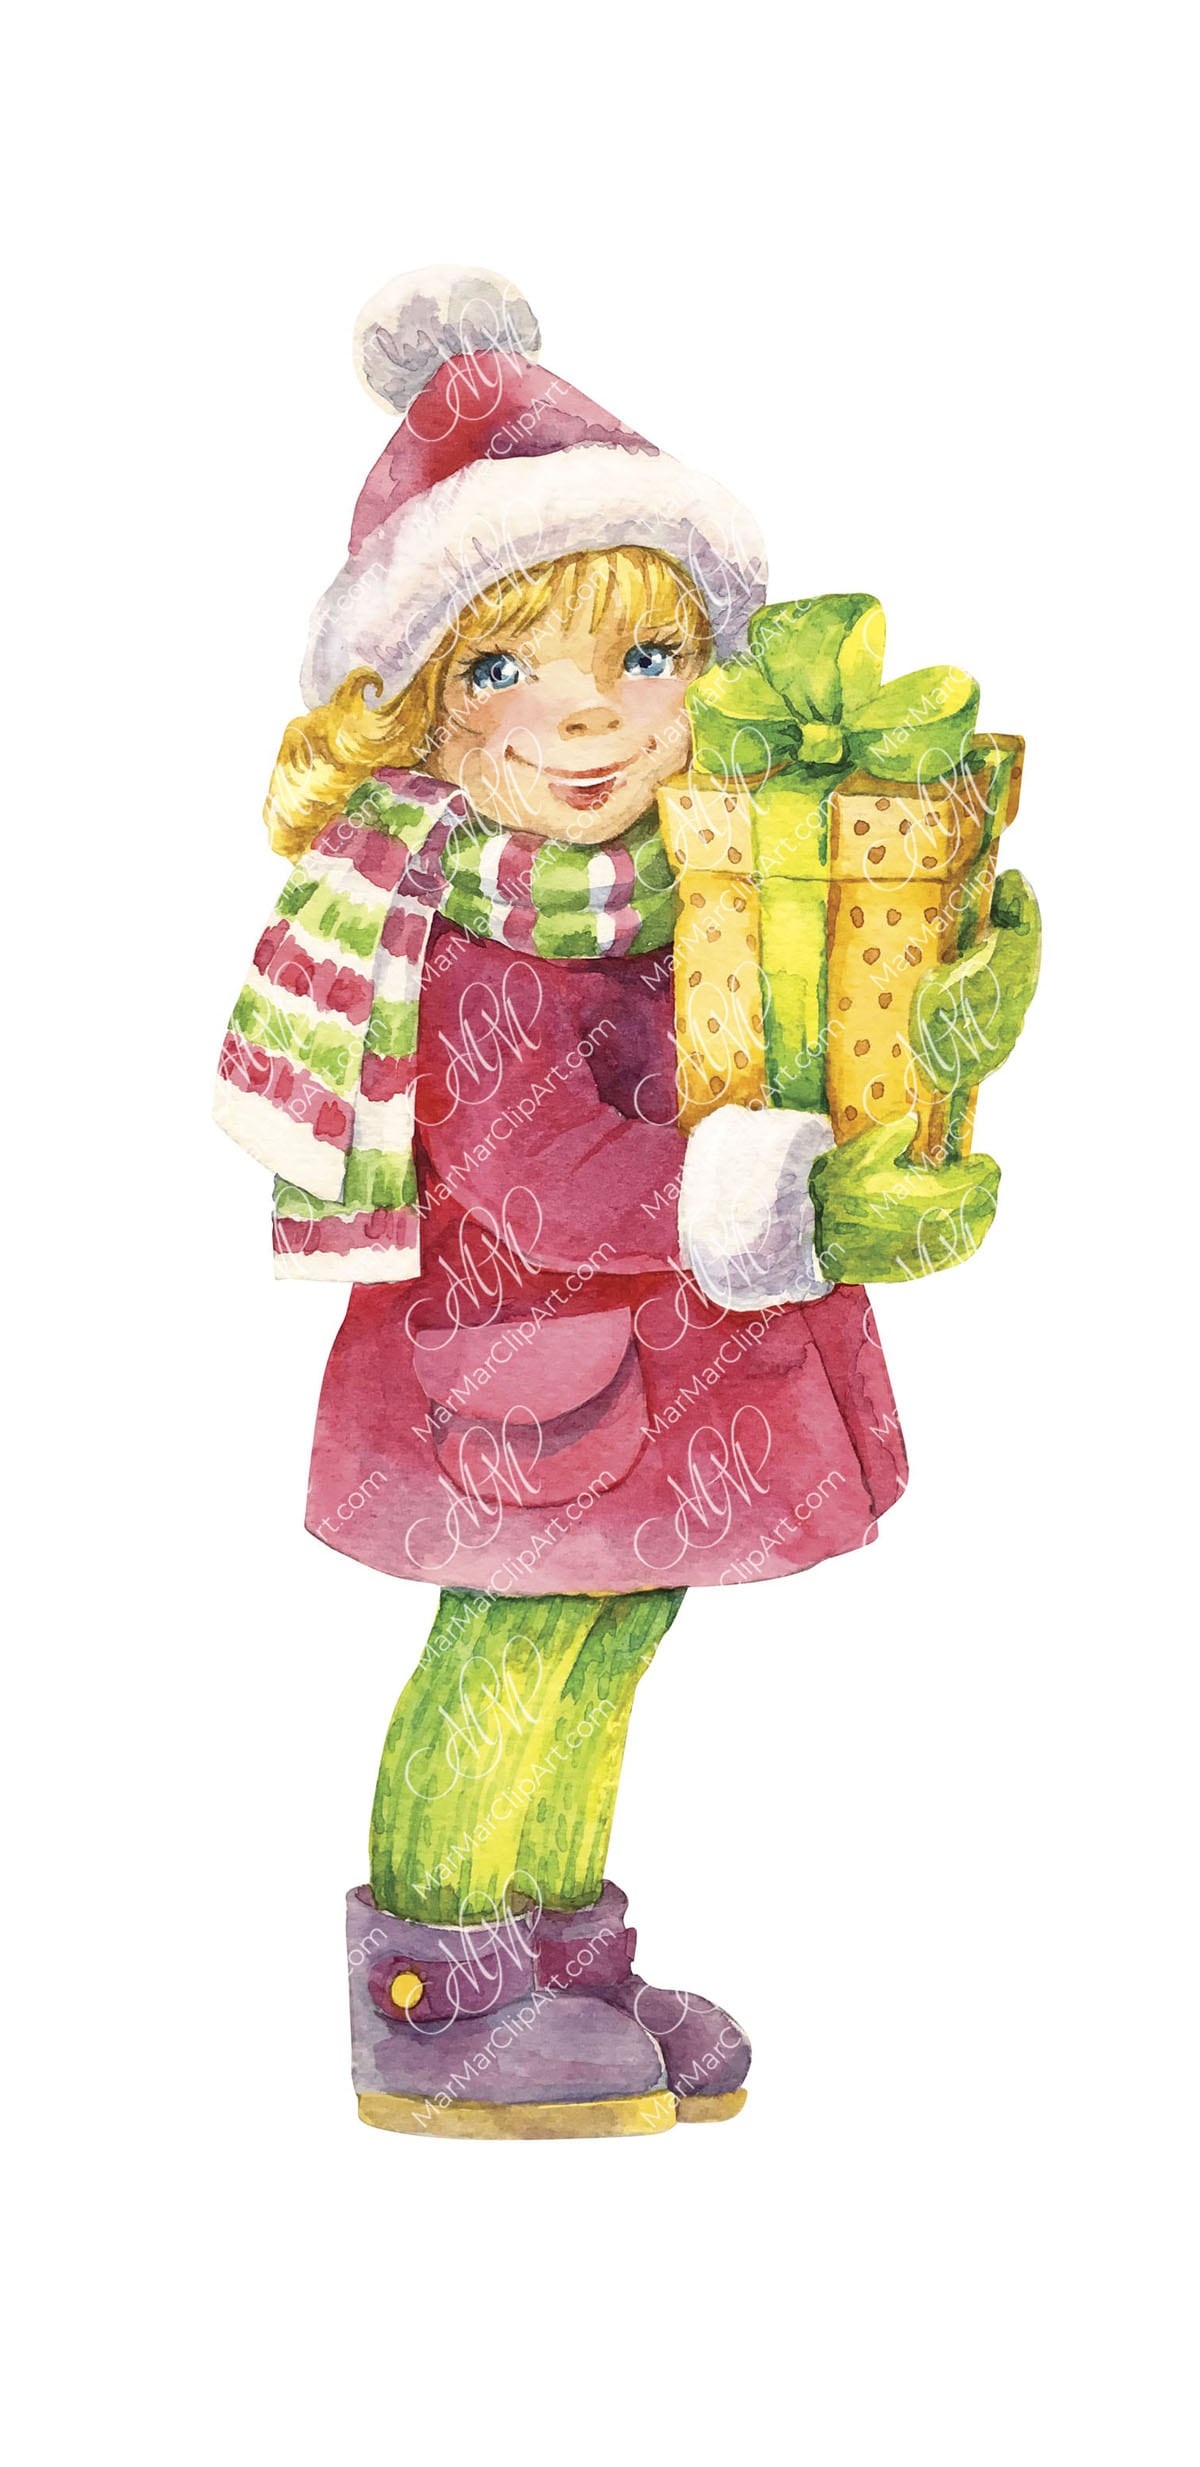 Girl with a gift from Santa. Watercolor hand made illustration, can be used for your cards, invitations, for your design works